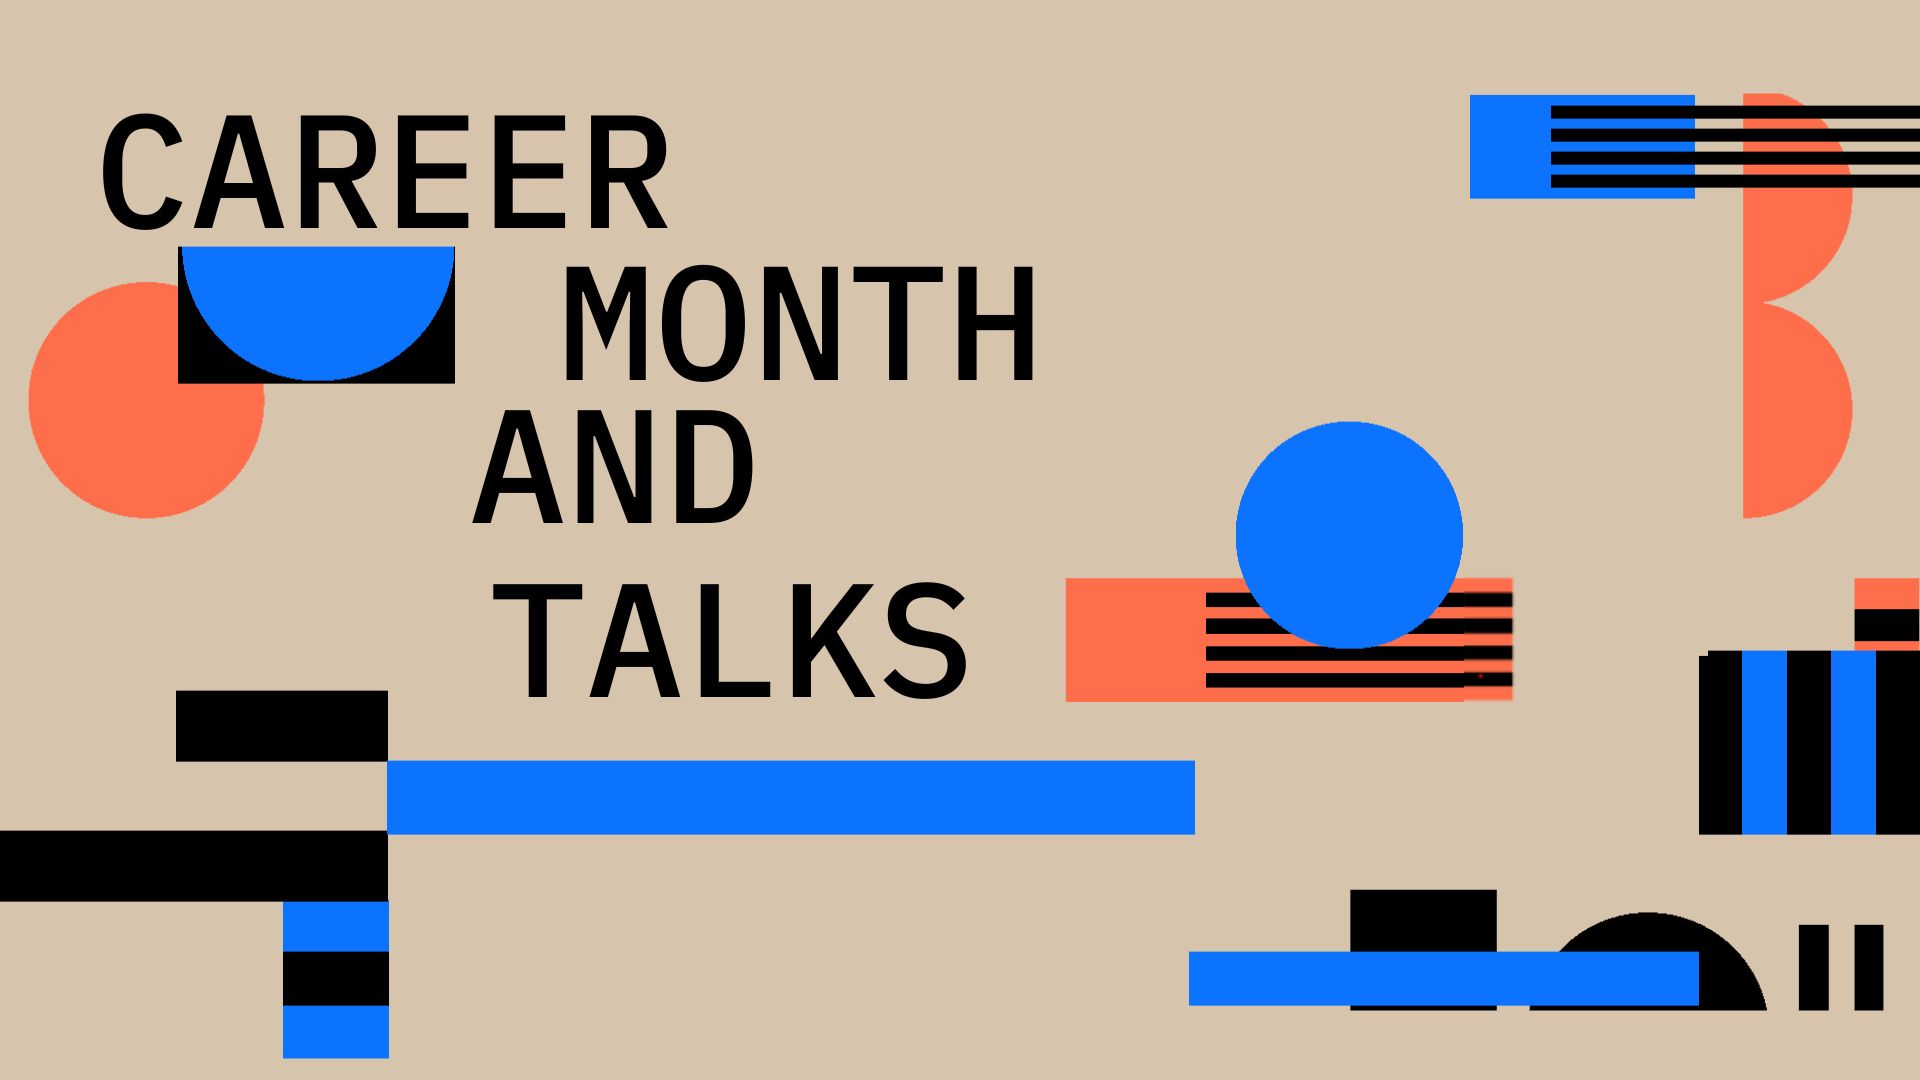 Career month: an event to stir yourself towards the future